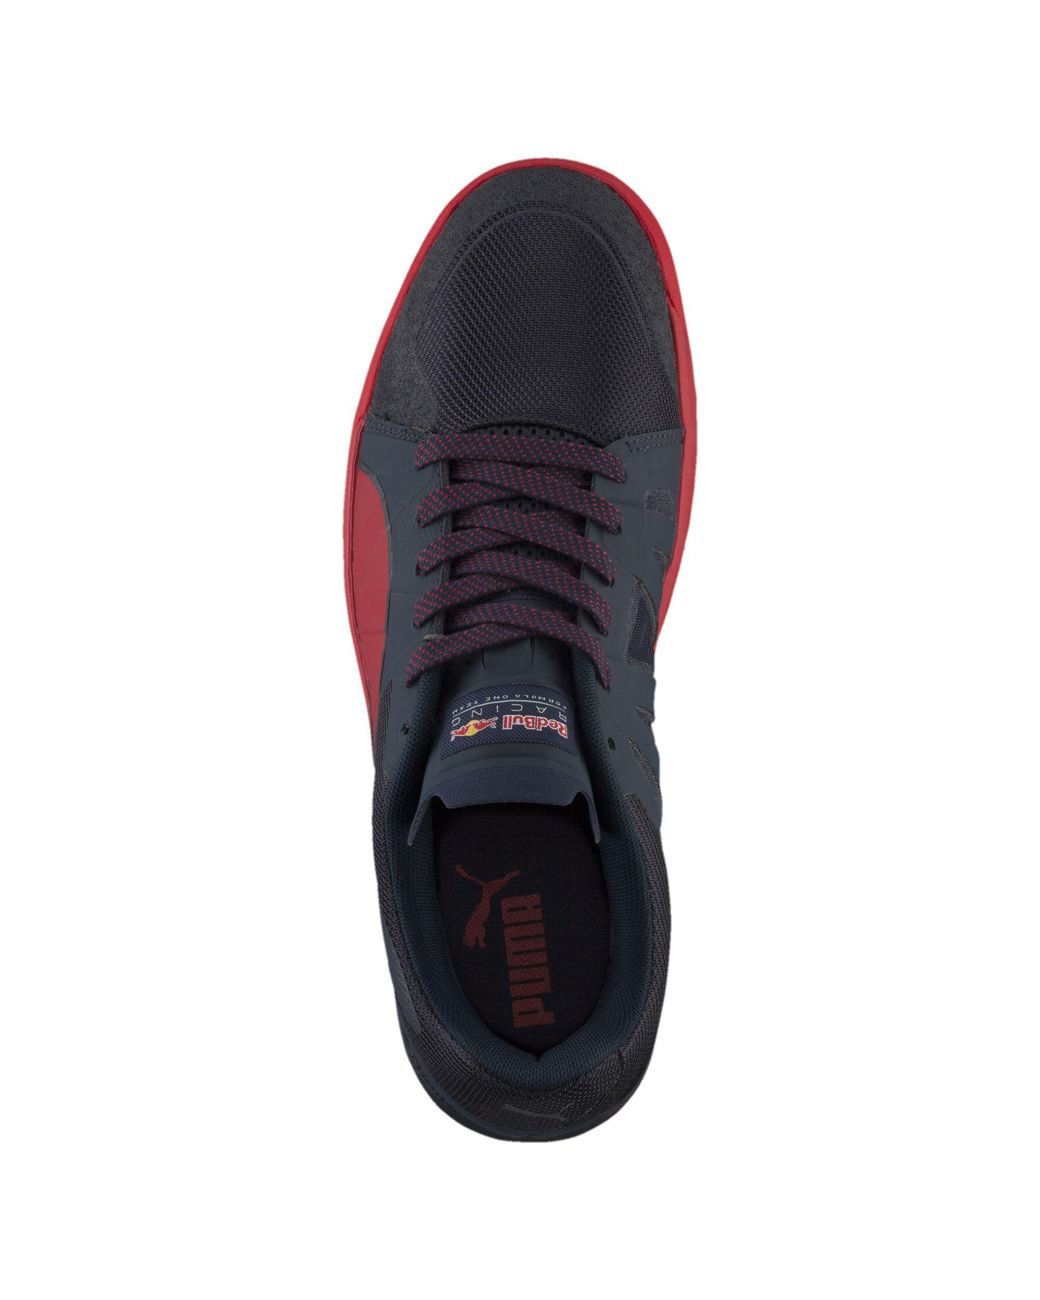 PUMA Synthetic Red Bull Racing Rider Culture Men's Shoes for Men | Lyst